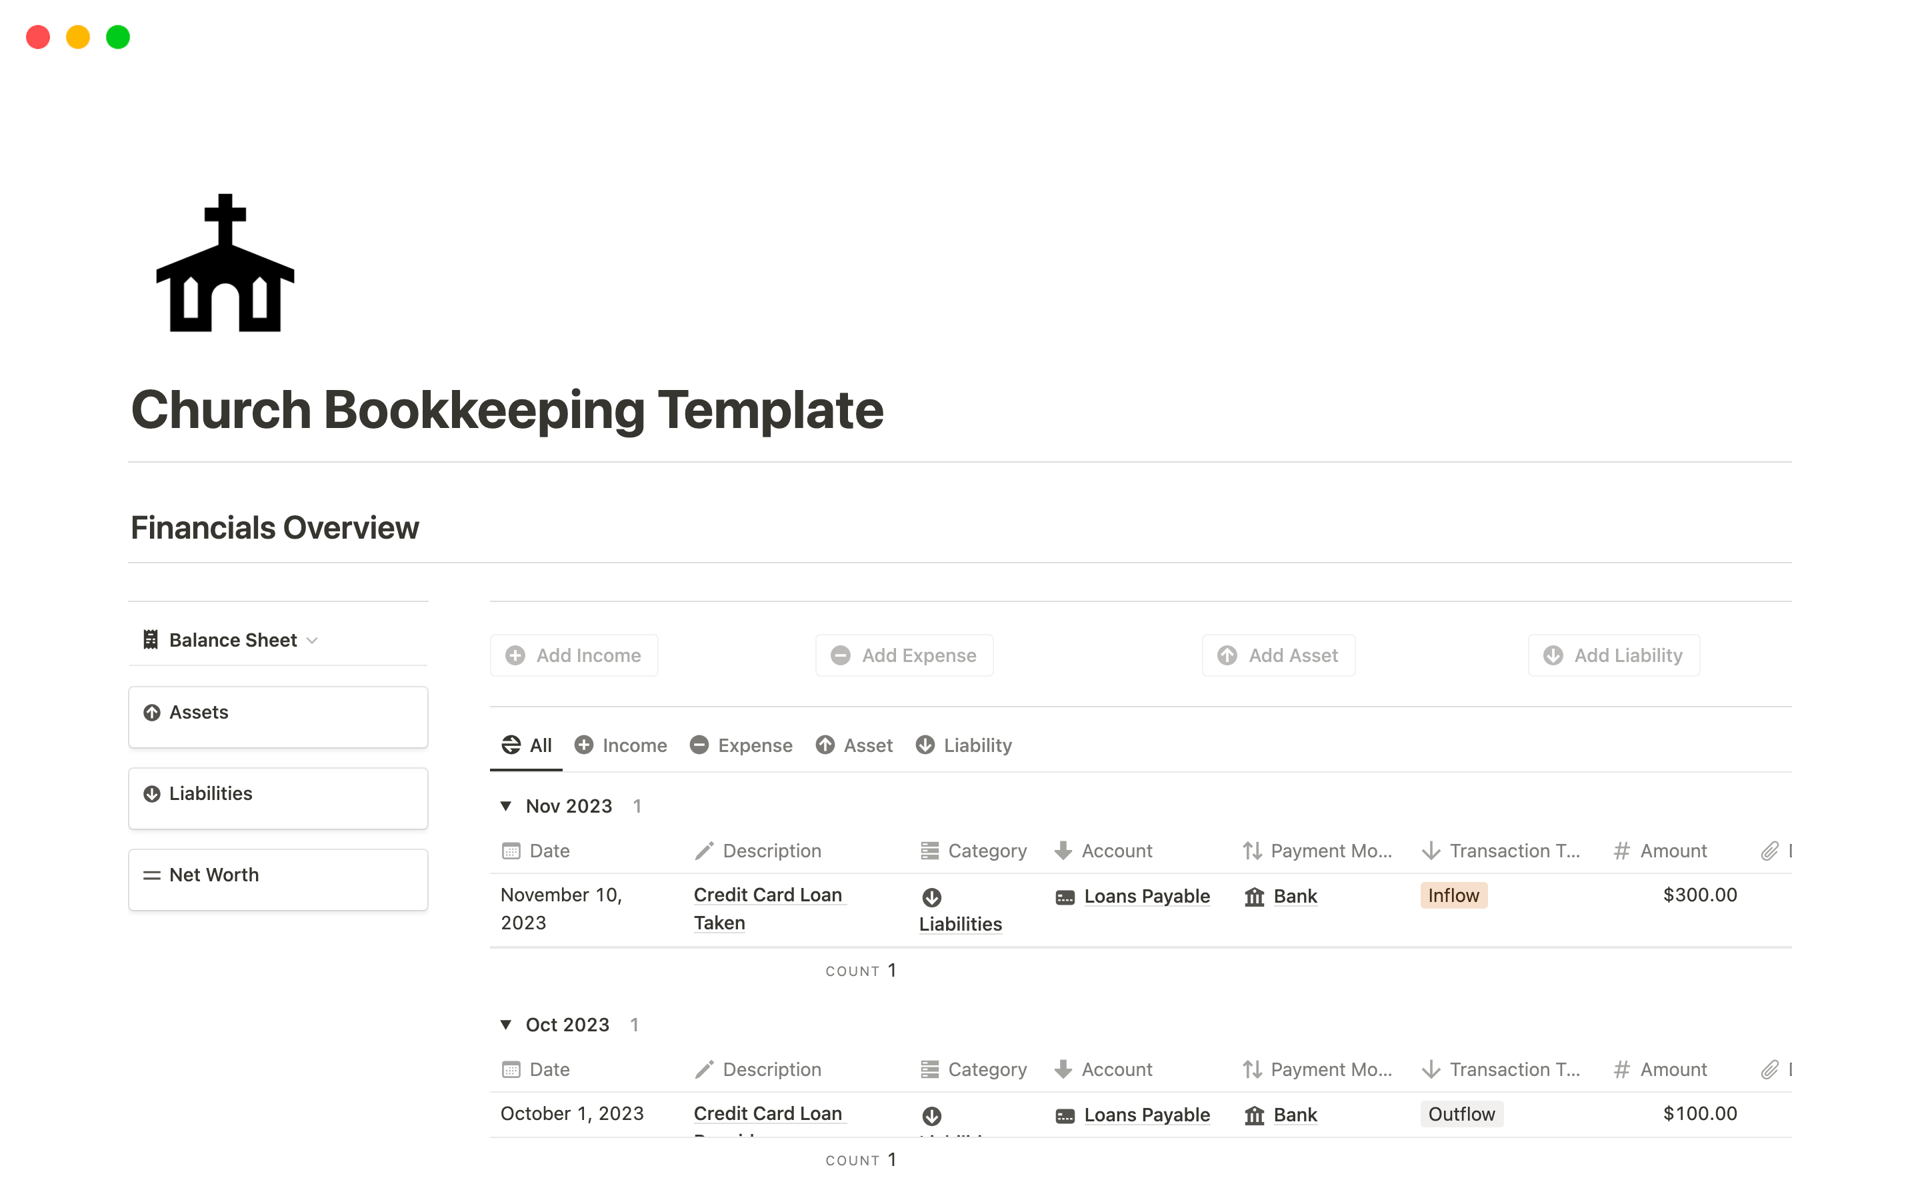 This bookkeeping template provides best solution for churches to manage their business finances, produce income statement, balance sheet, cash flow statement and much more on a periodical basis.